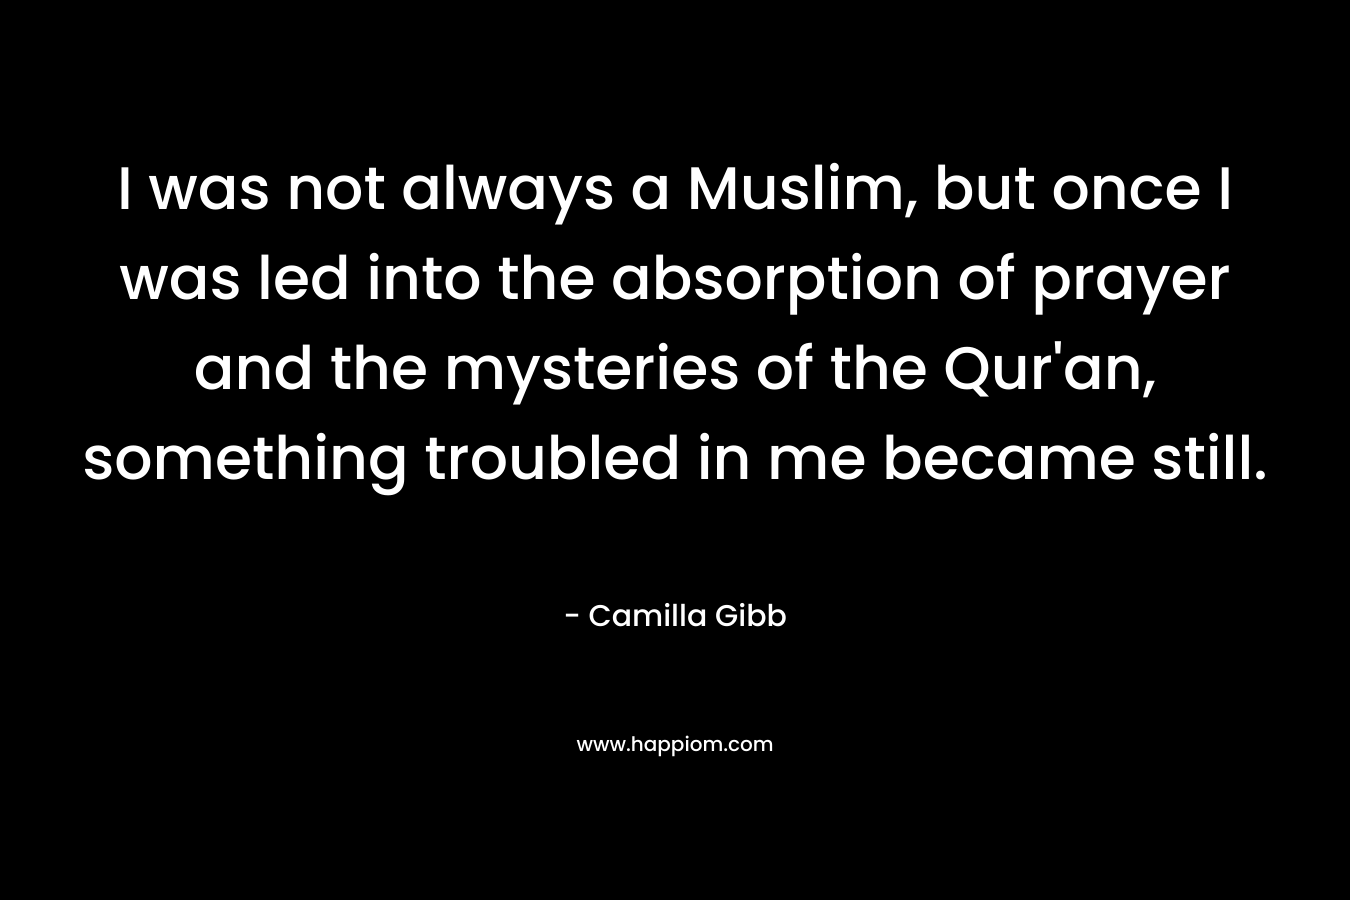 I was not always a Muslim, but once I was led into the absorption of prayer and the mysteries of the Qur'an, something troubled in me became still.